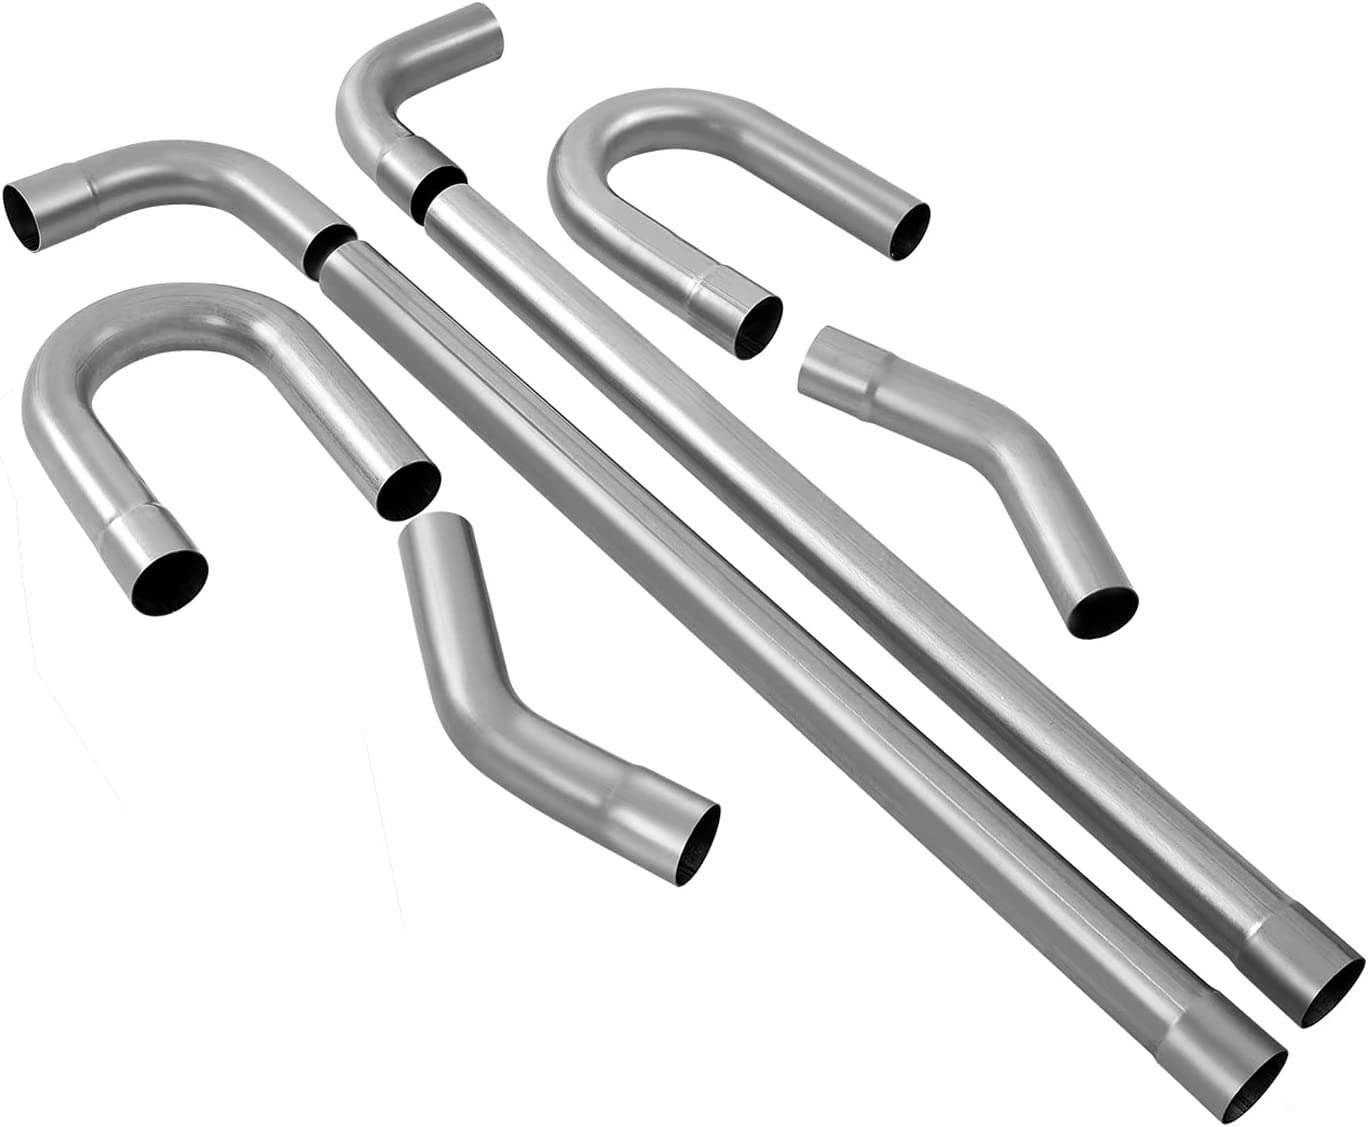 8PCS DIY Stainless Steel 2.5 Exhaust Pipe Kit,Including Mandrel Bend Pipe & U-Be